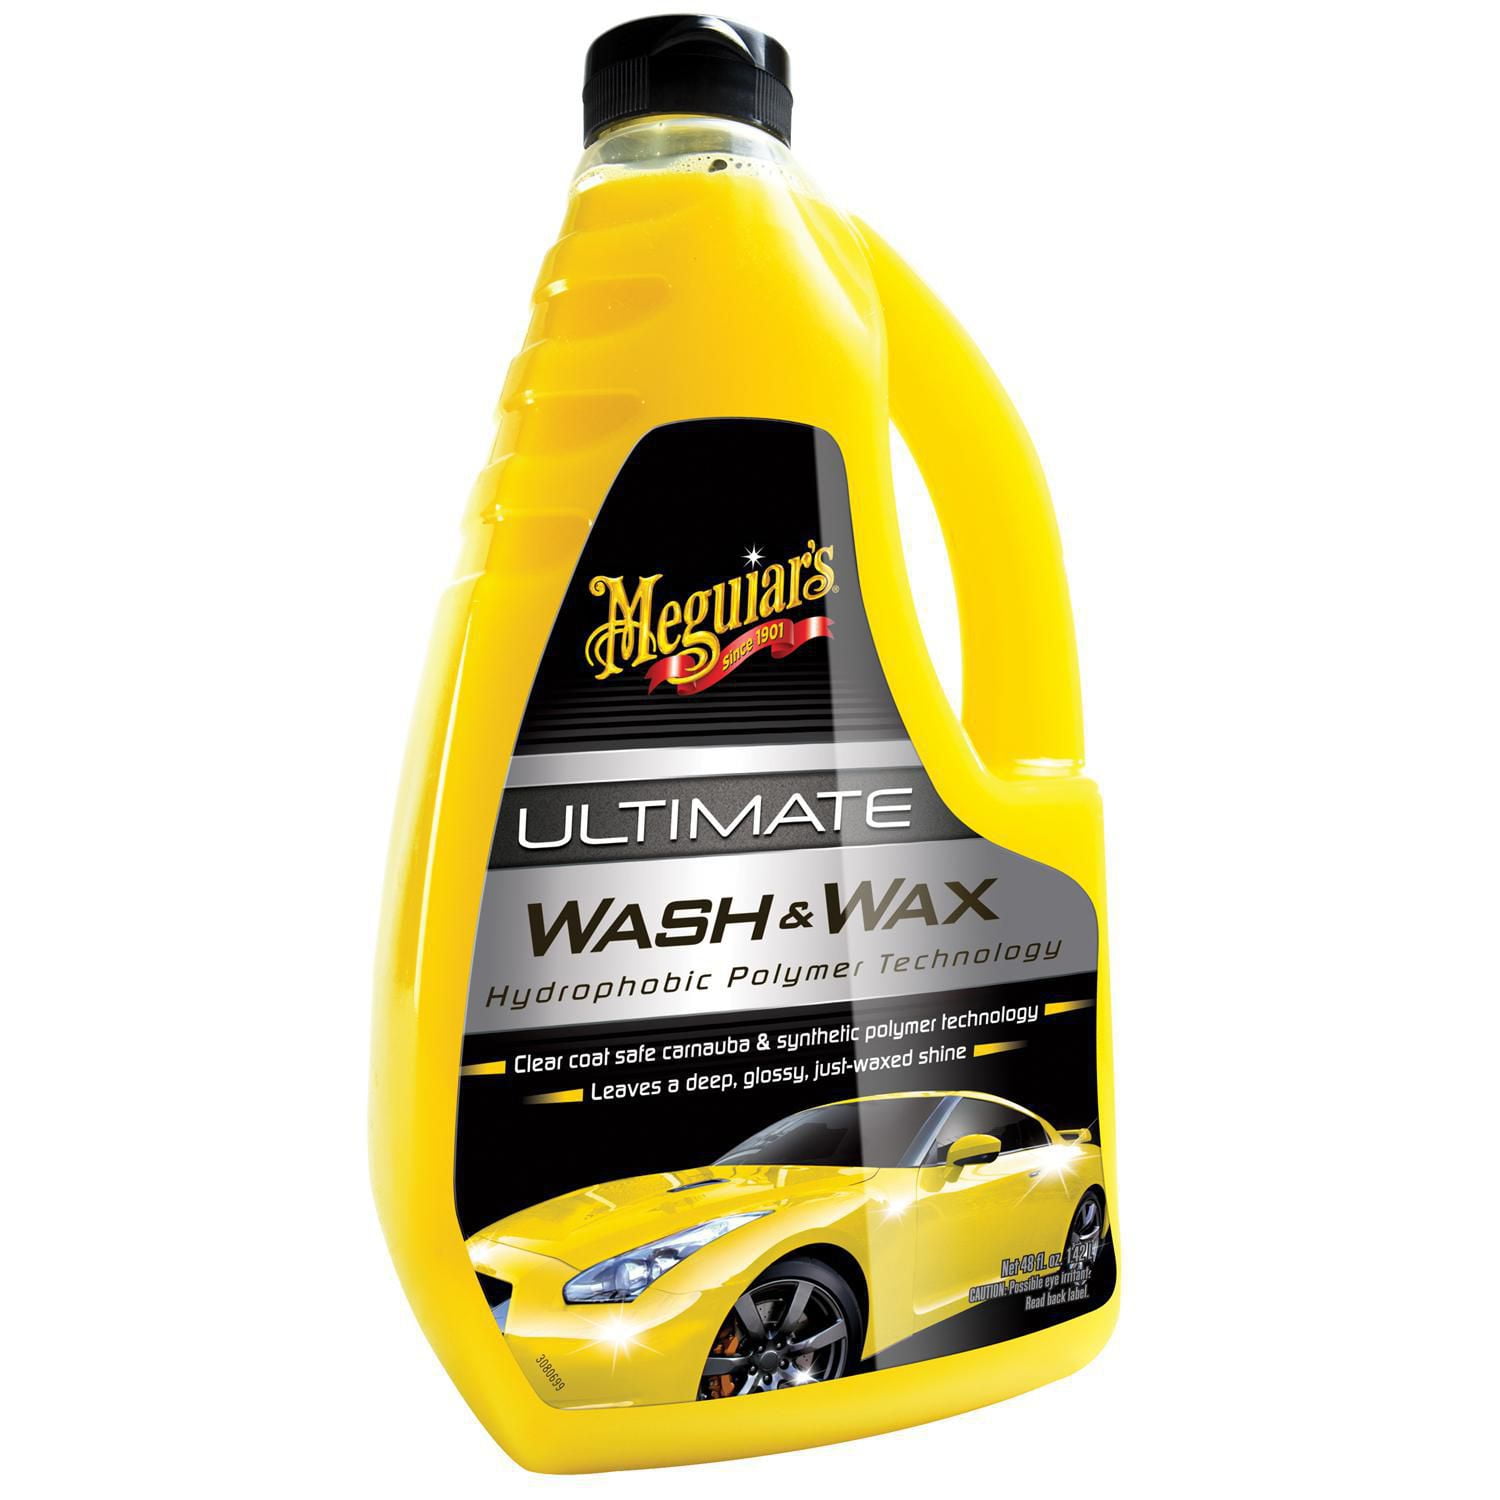 Meguiar's - The problem with washing and waxing is that